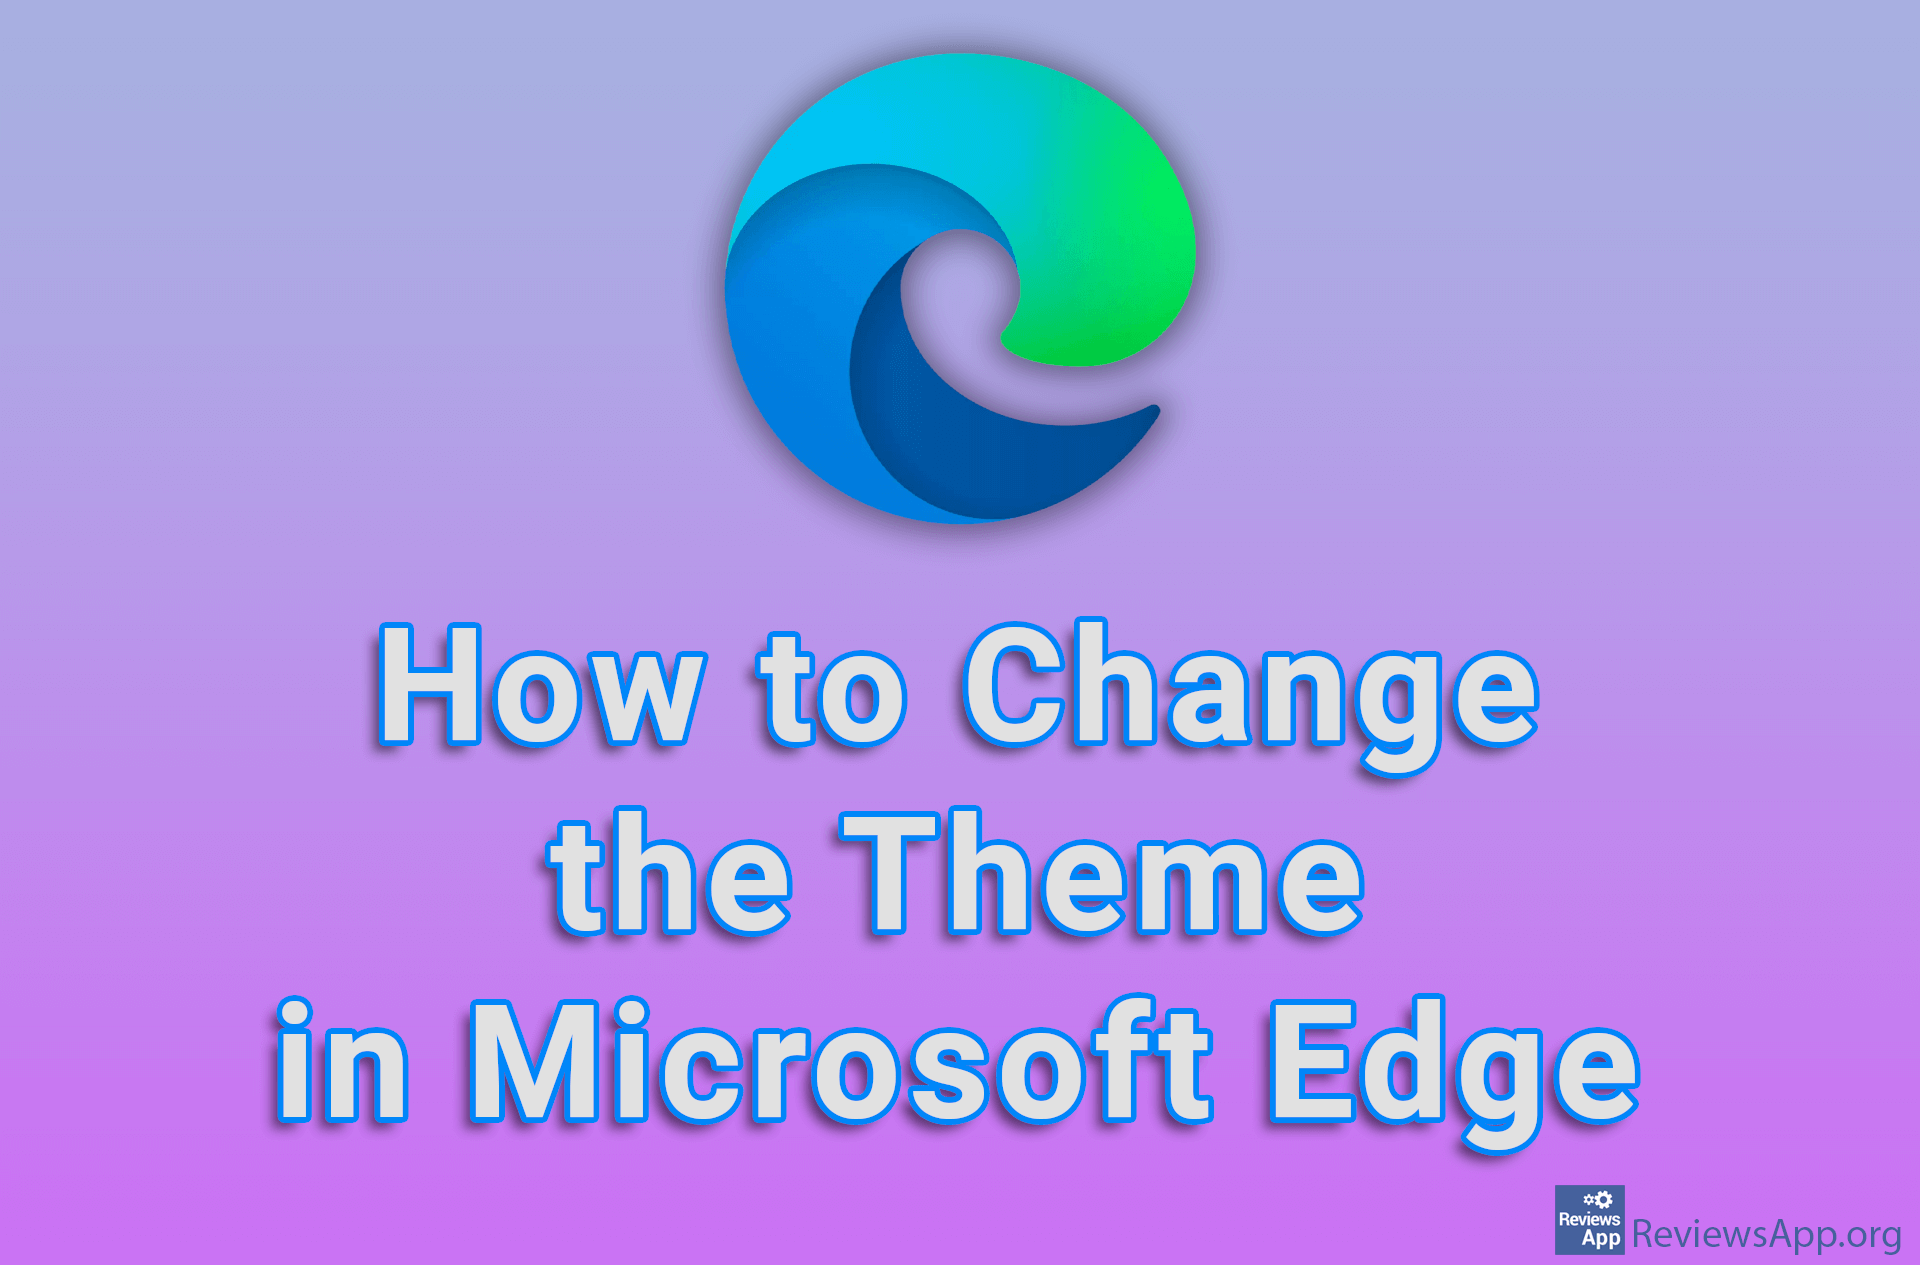 How to Change the Theme in Microsoft Edge